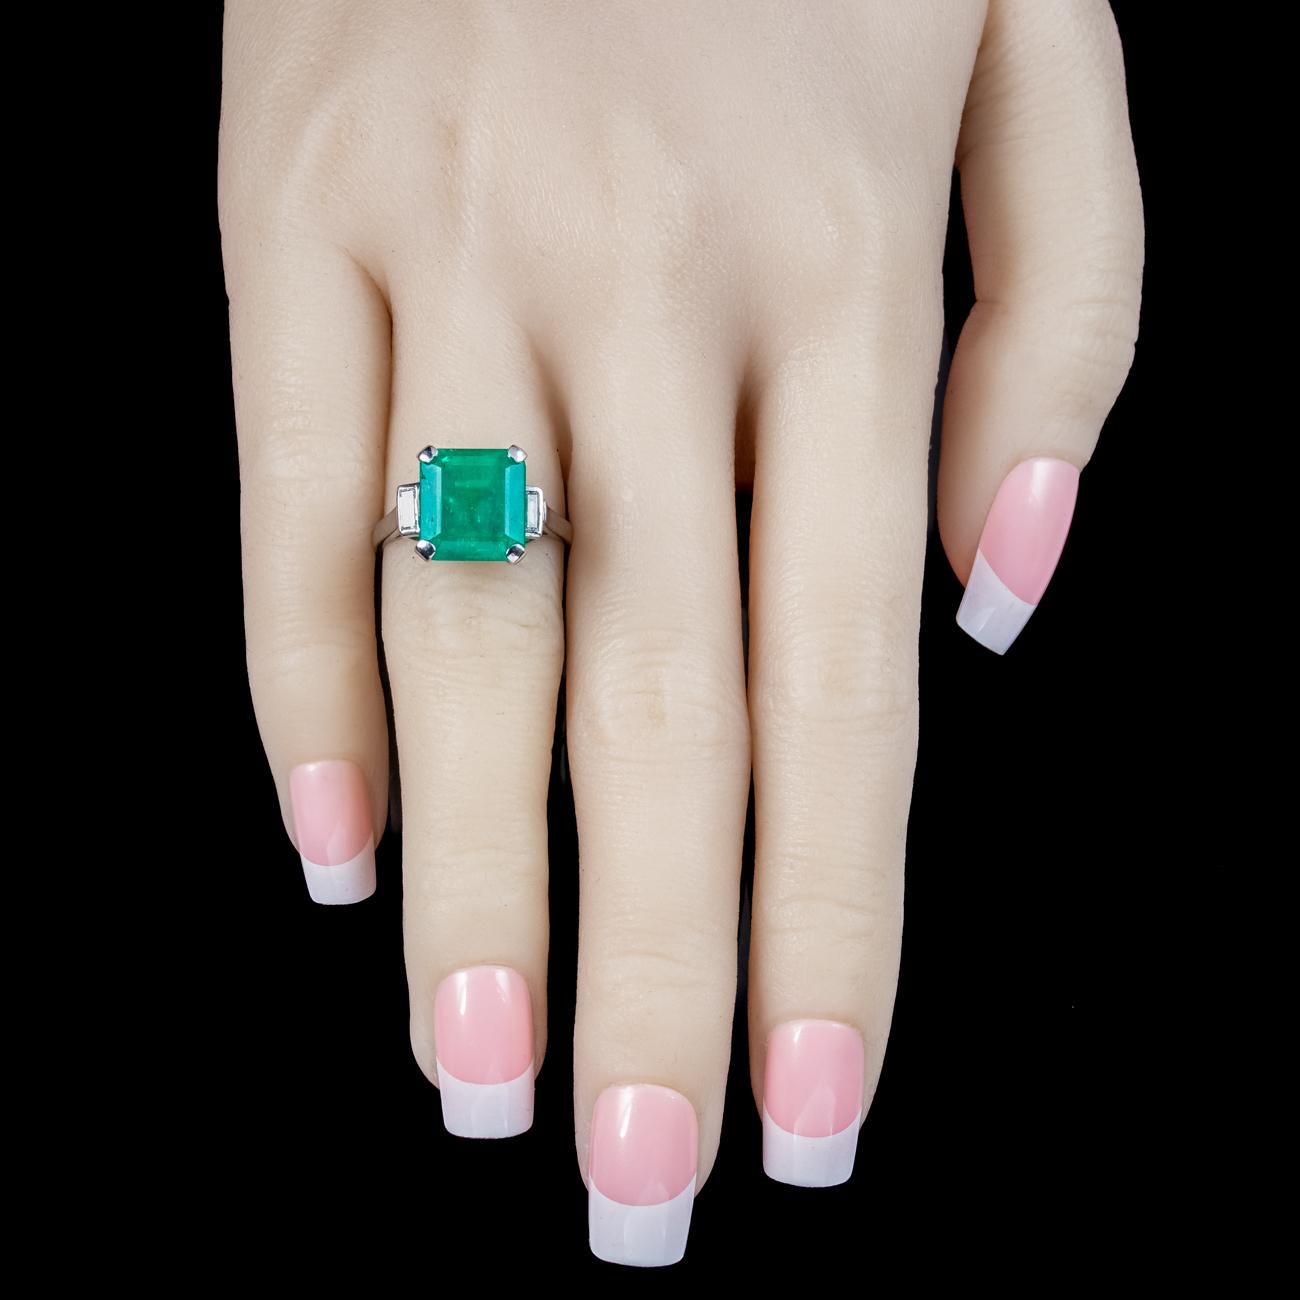 Women's Art Deco Emerald Diamond Trilogy Ring 7.24ct Colombian Emerald With Cert For Sale